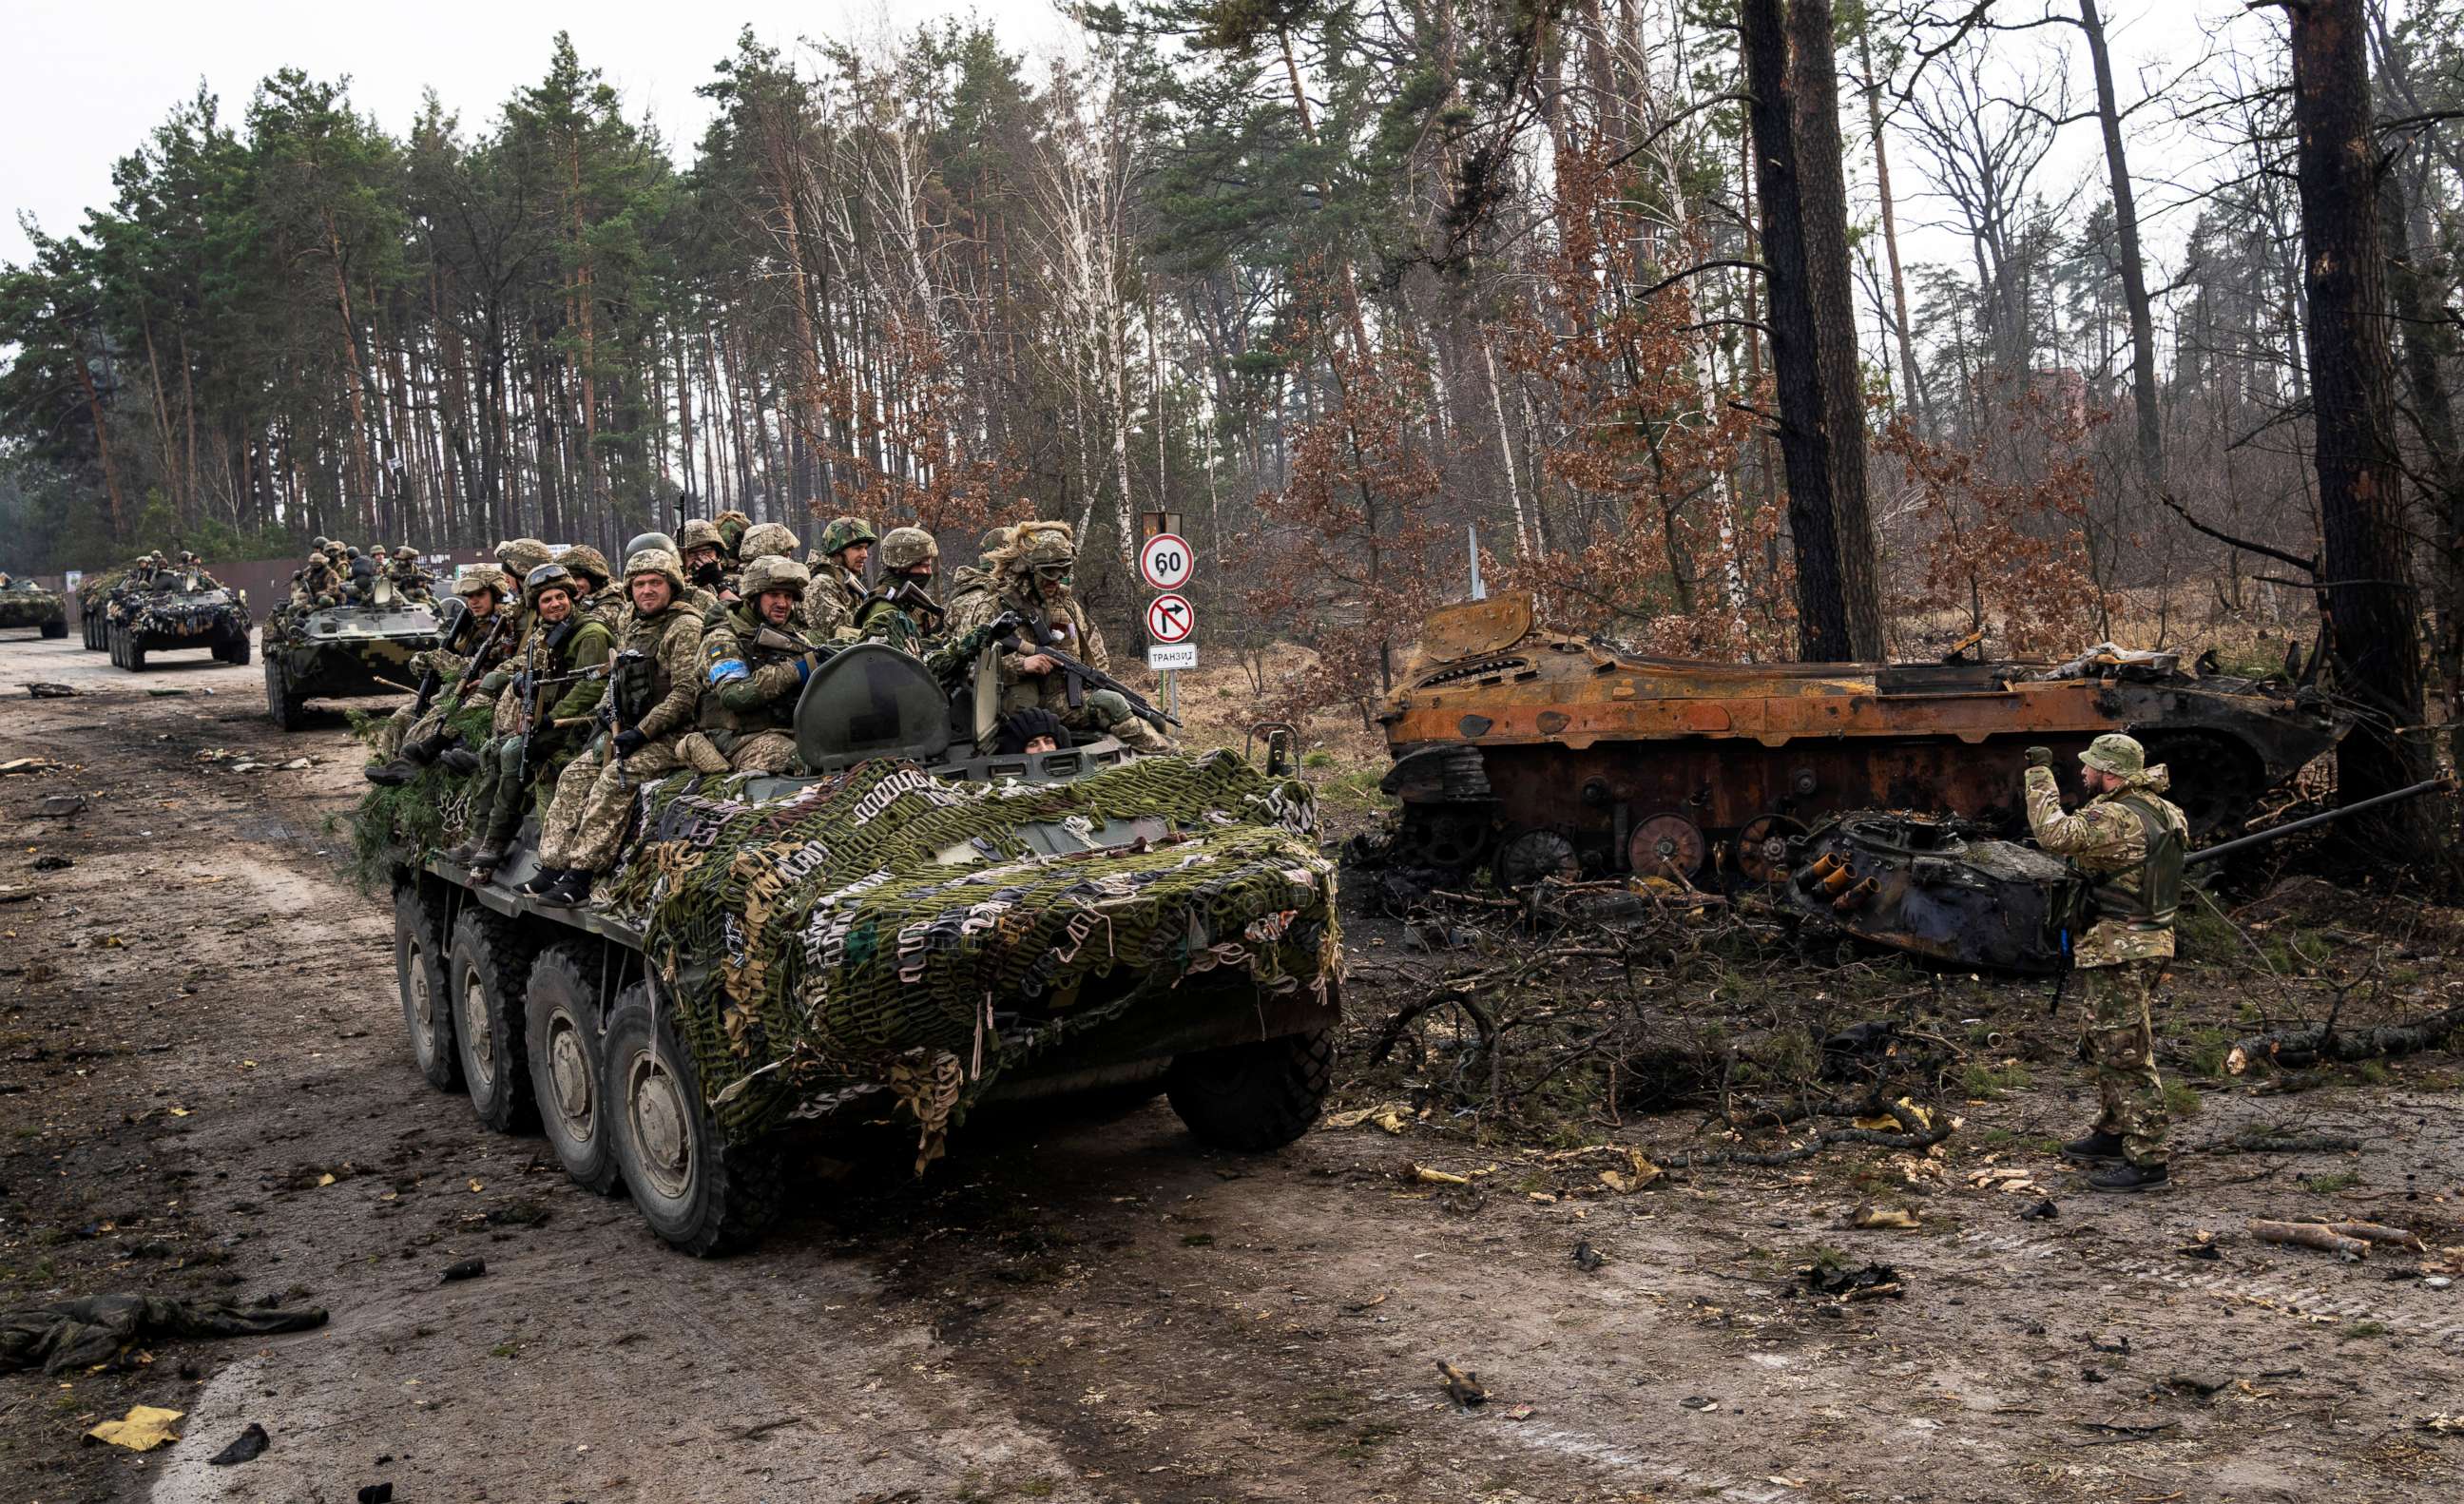 PHOTO: Ukrainian soldiers pass on top of armored vehicles next to a destroyed Russian tank in the outskirts of Kyiv, Ukraine, on March 31, 2022.